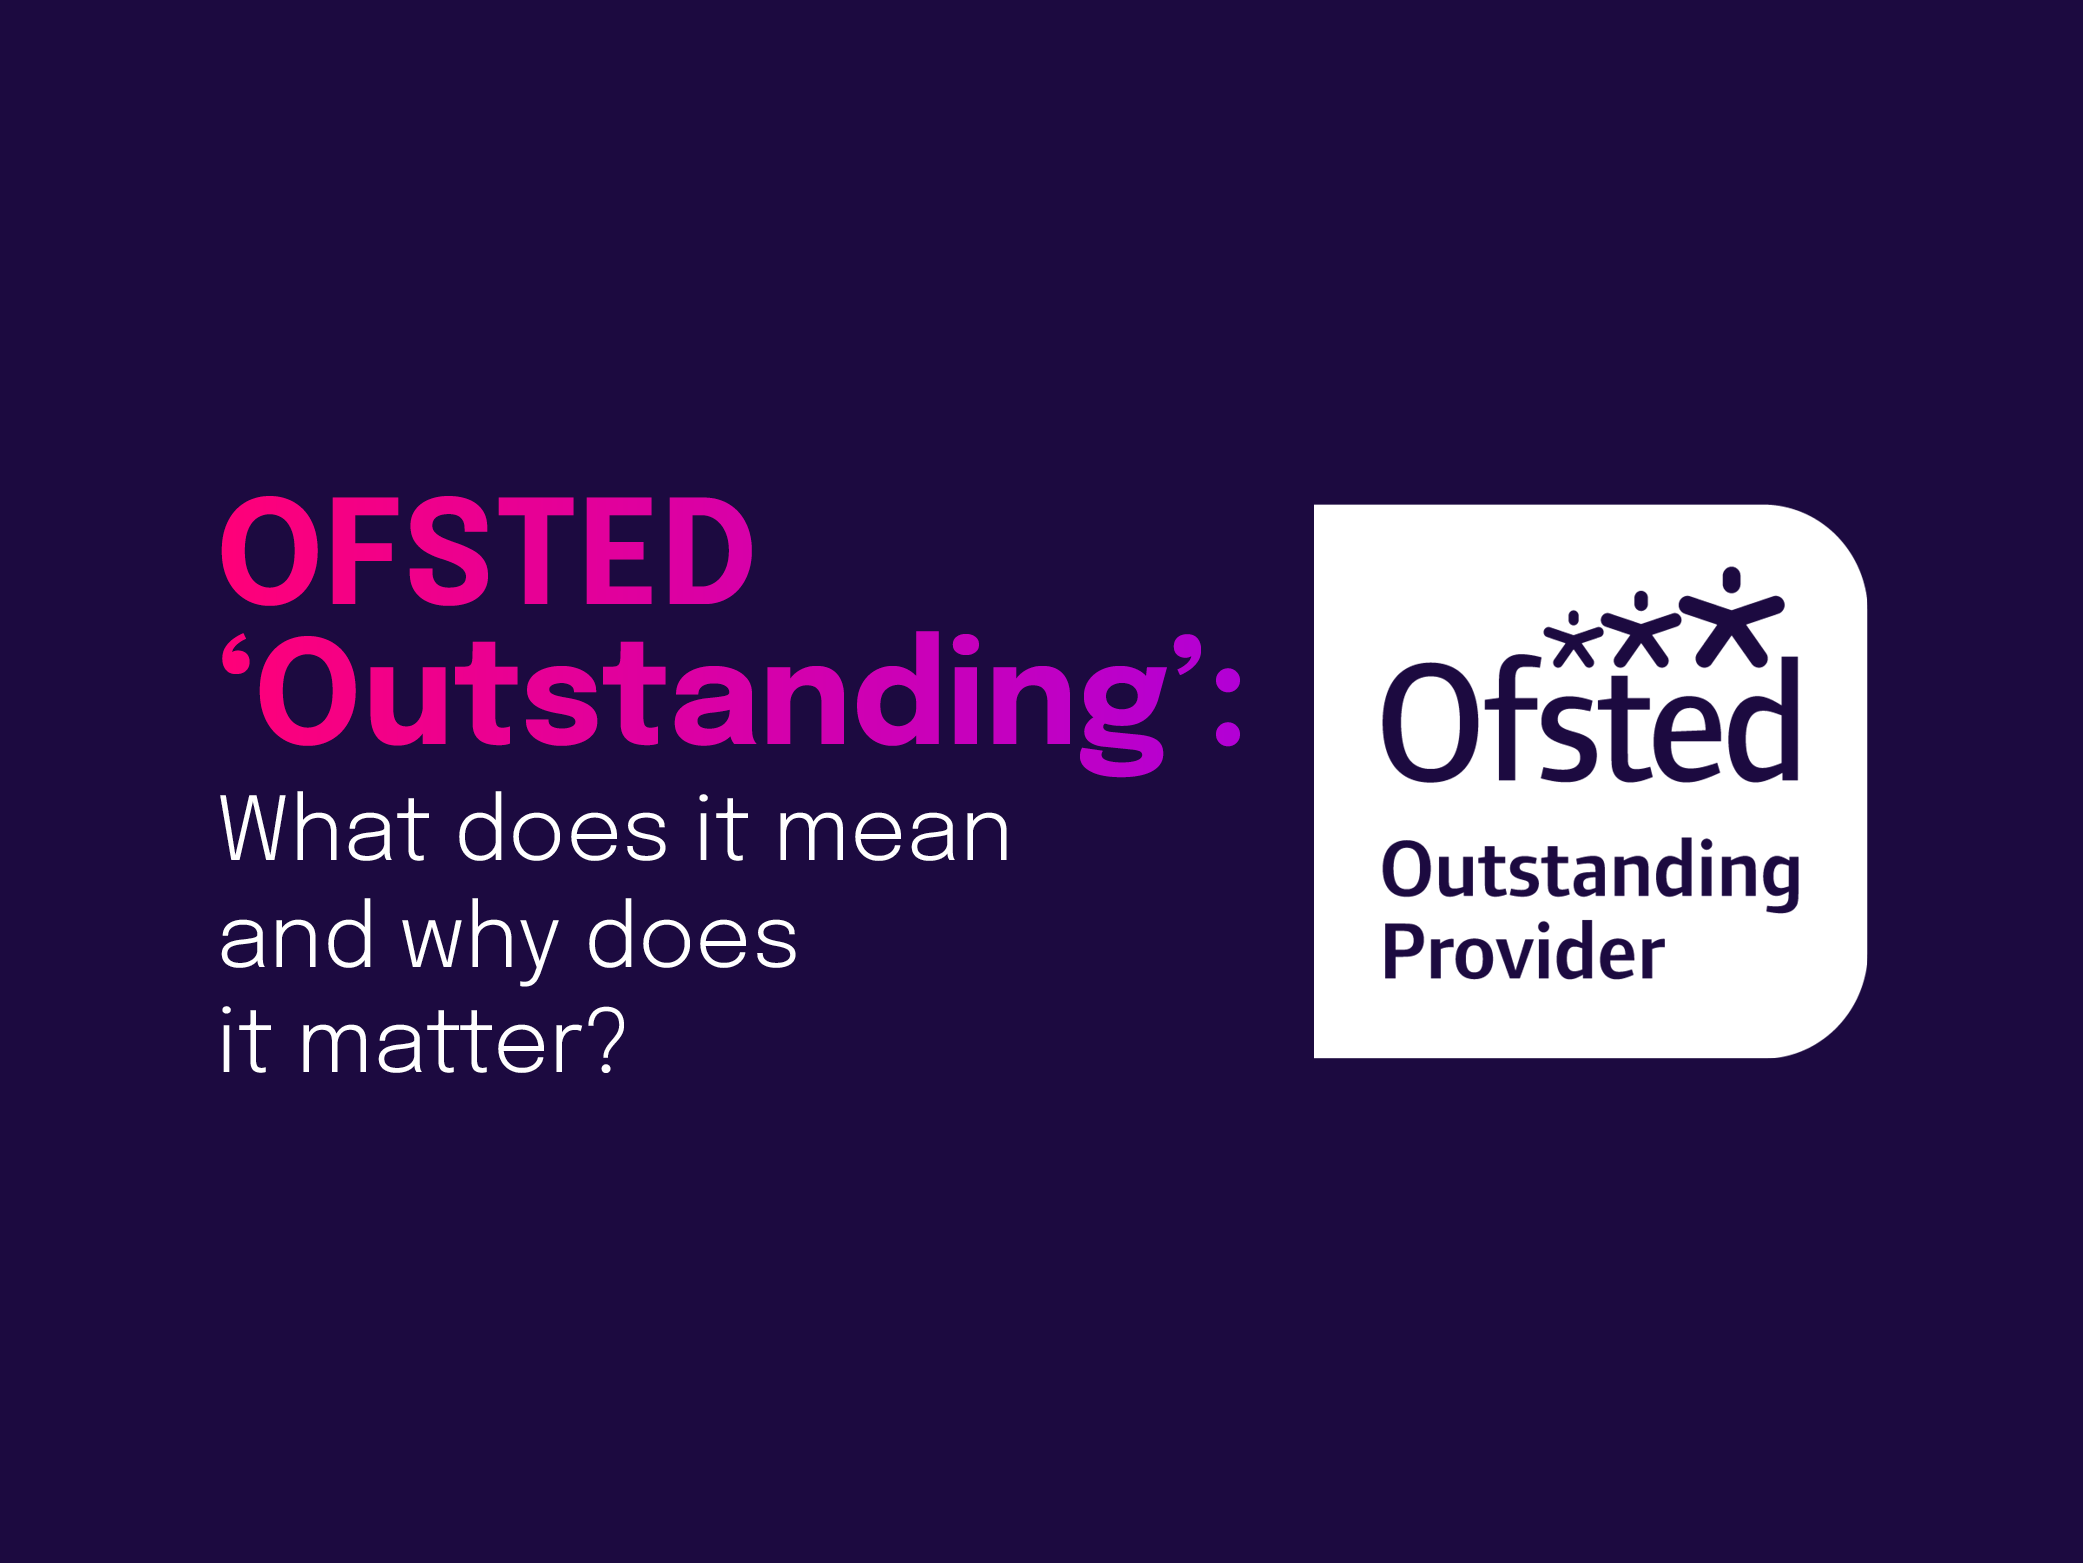 'OFSTED Outstanding': What Does it Mean and Why Does it Matter?